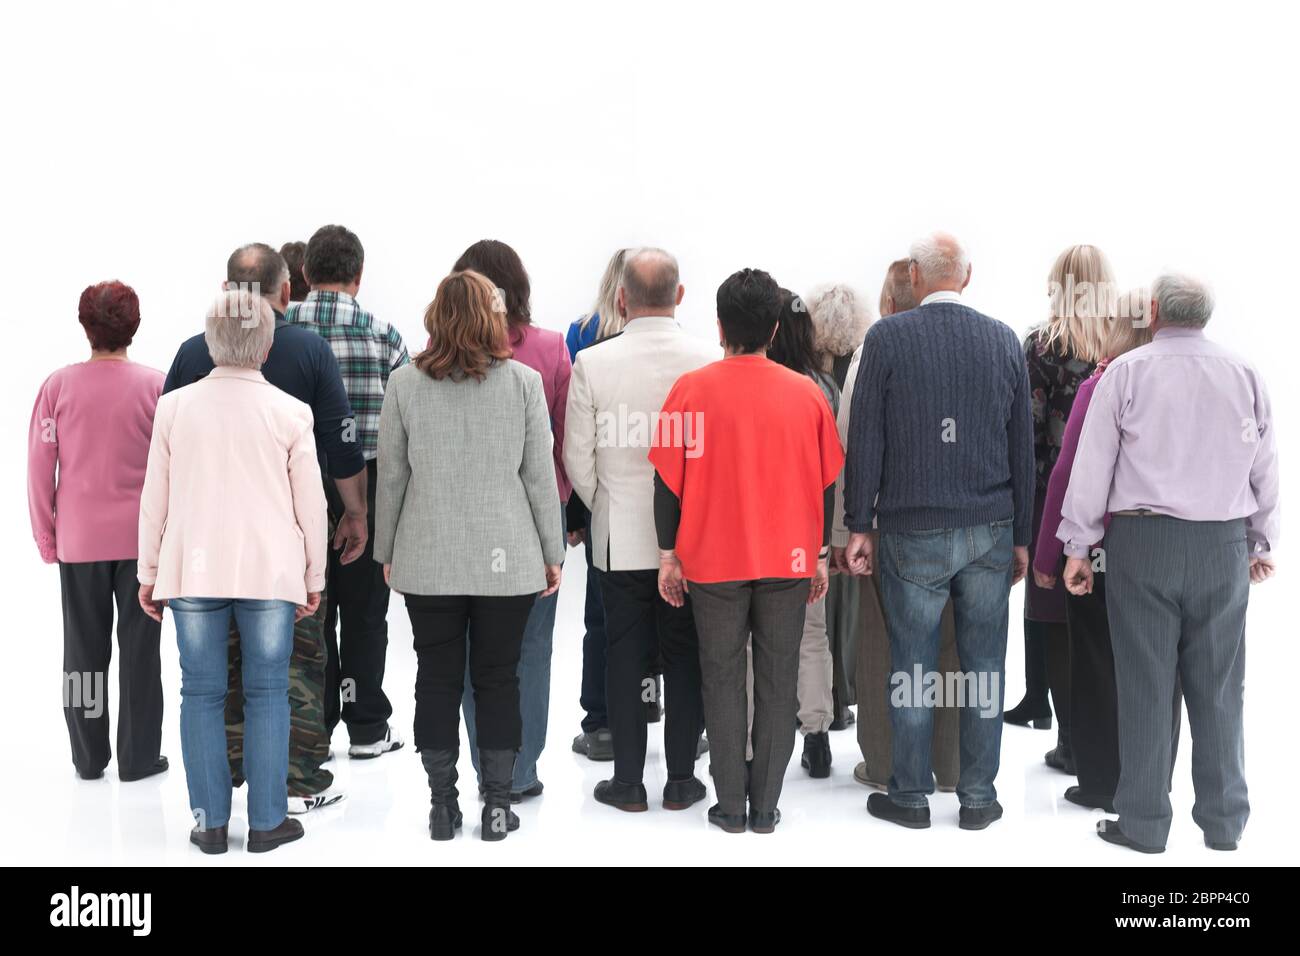 Rear view of a casual group of elderly people isolated over a white background Stock Photo